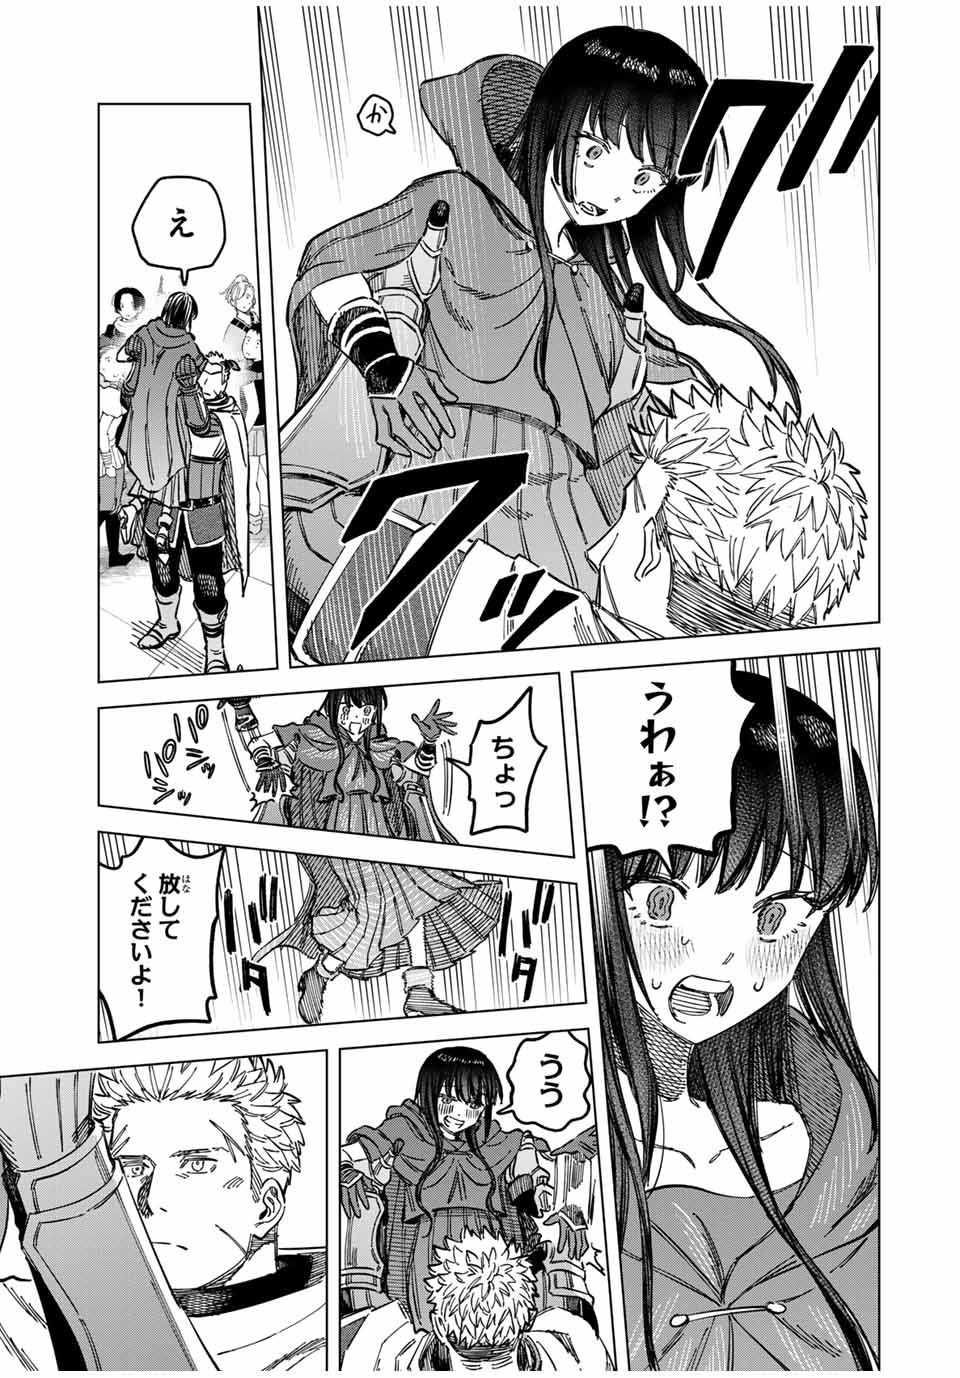 Witch and Mercenary 魔女と傭兵 第5.1話 - Page 3